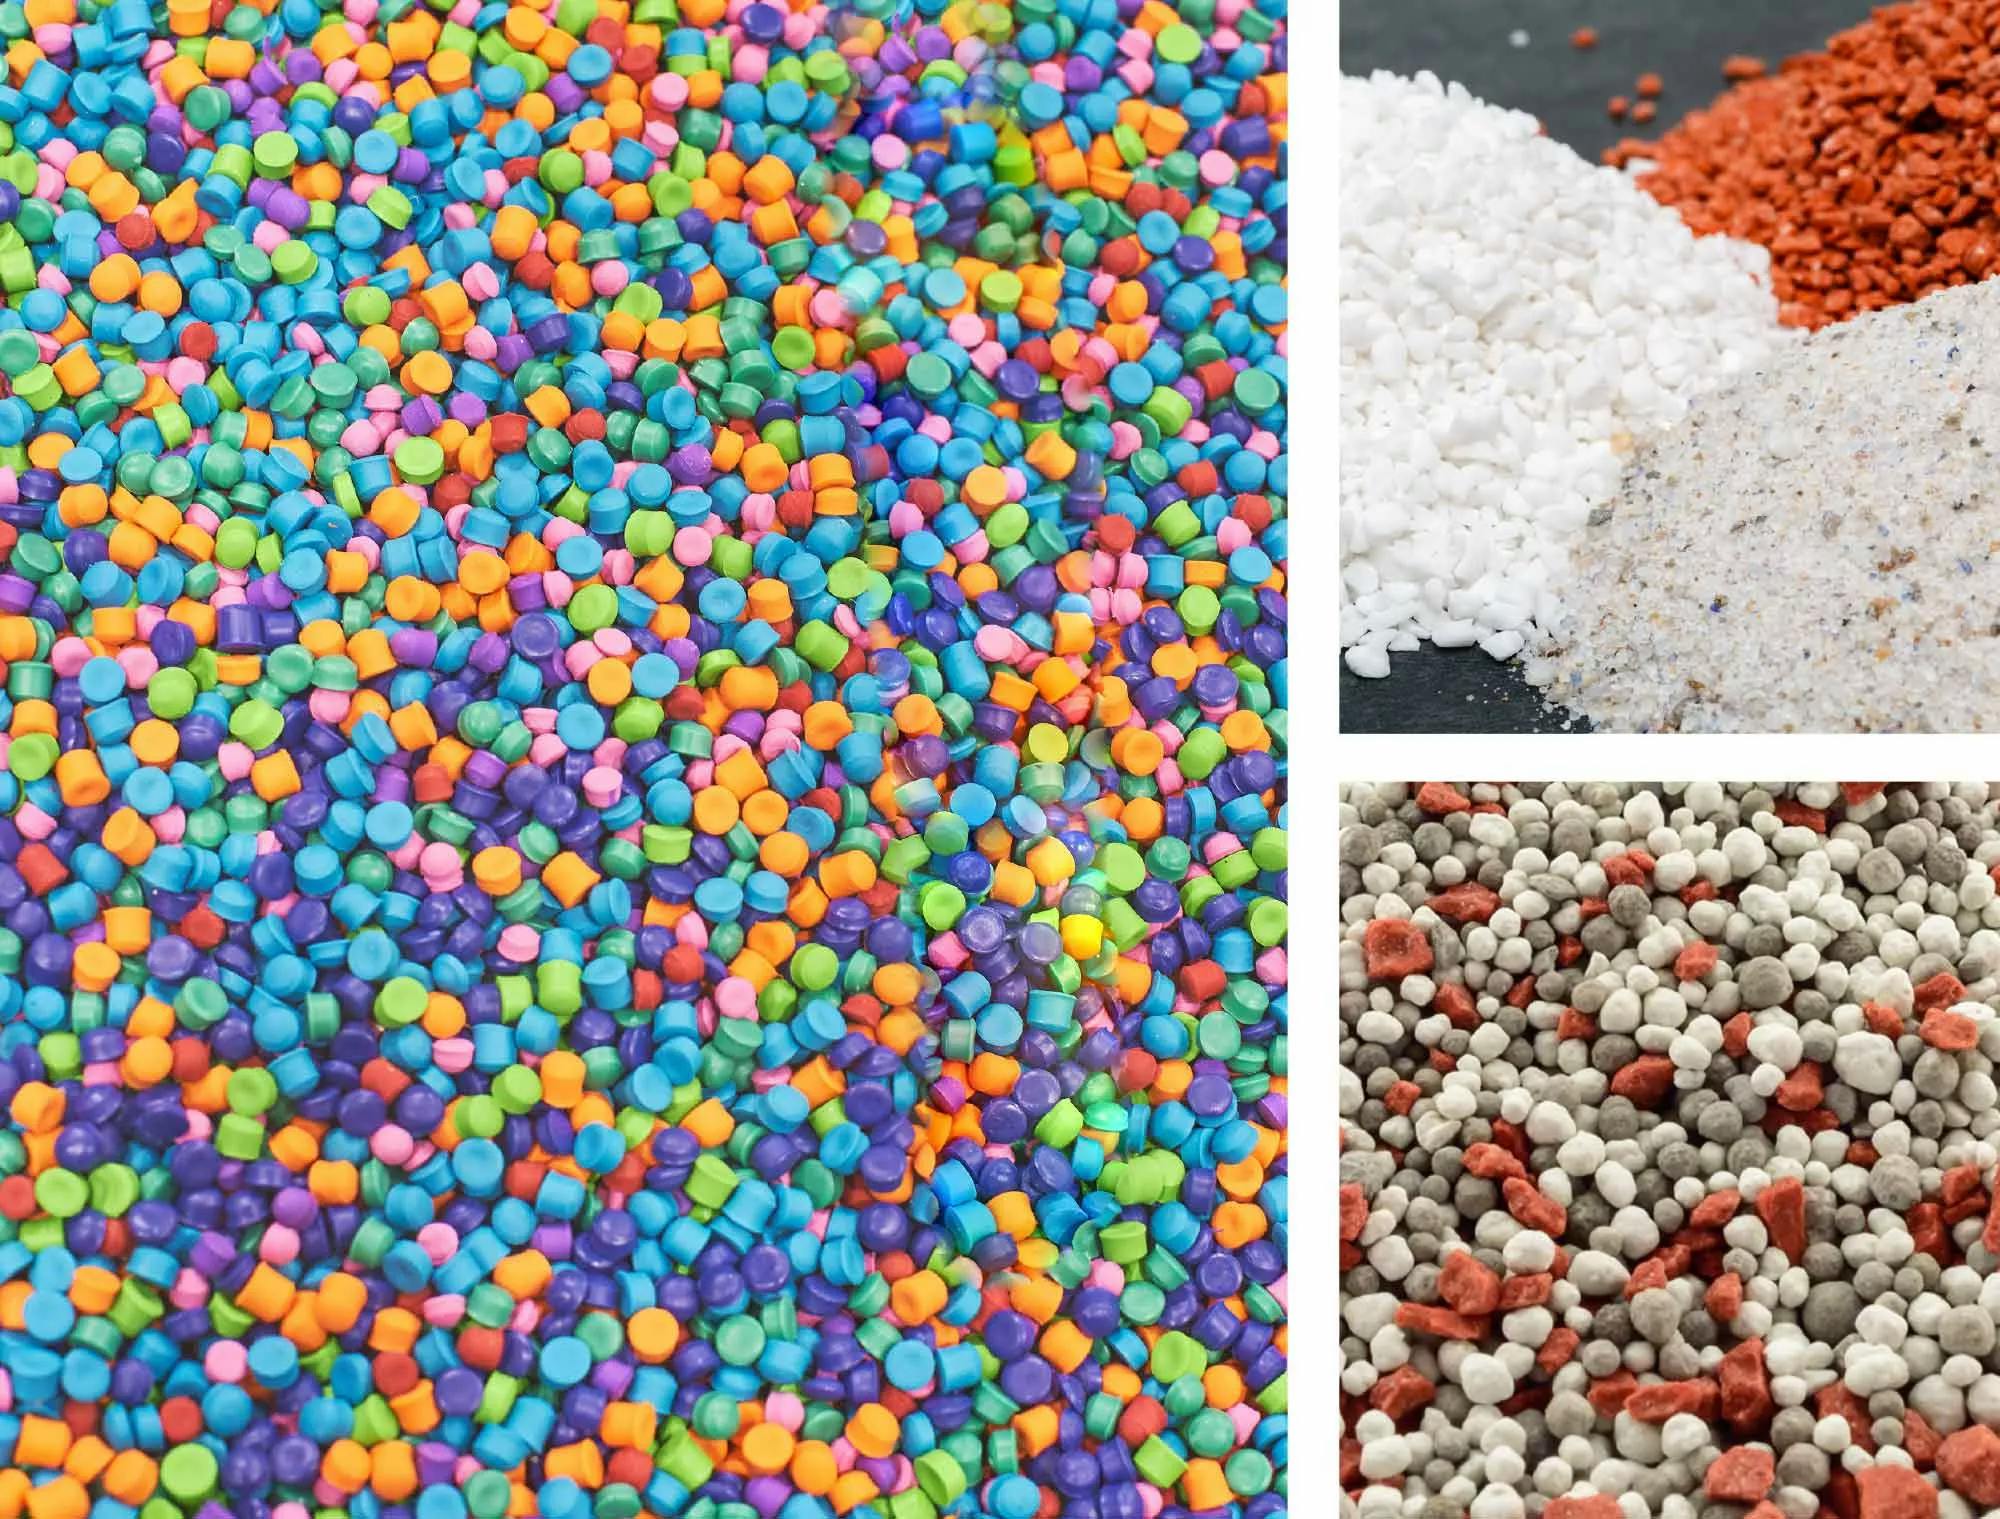 Different fertilizers and chemical bulk materials